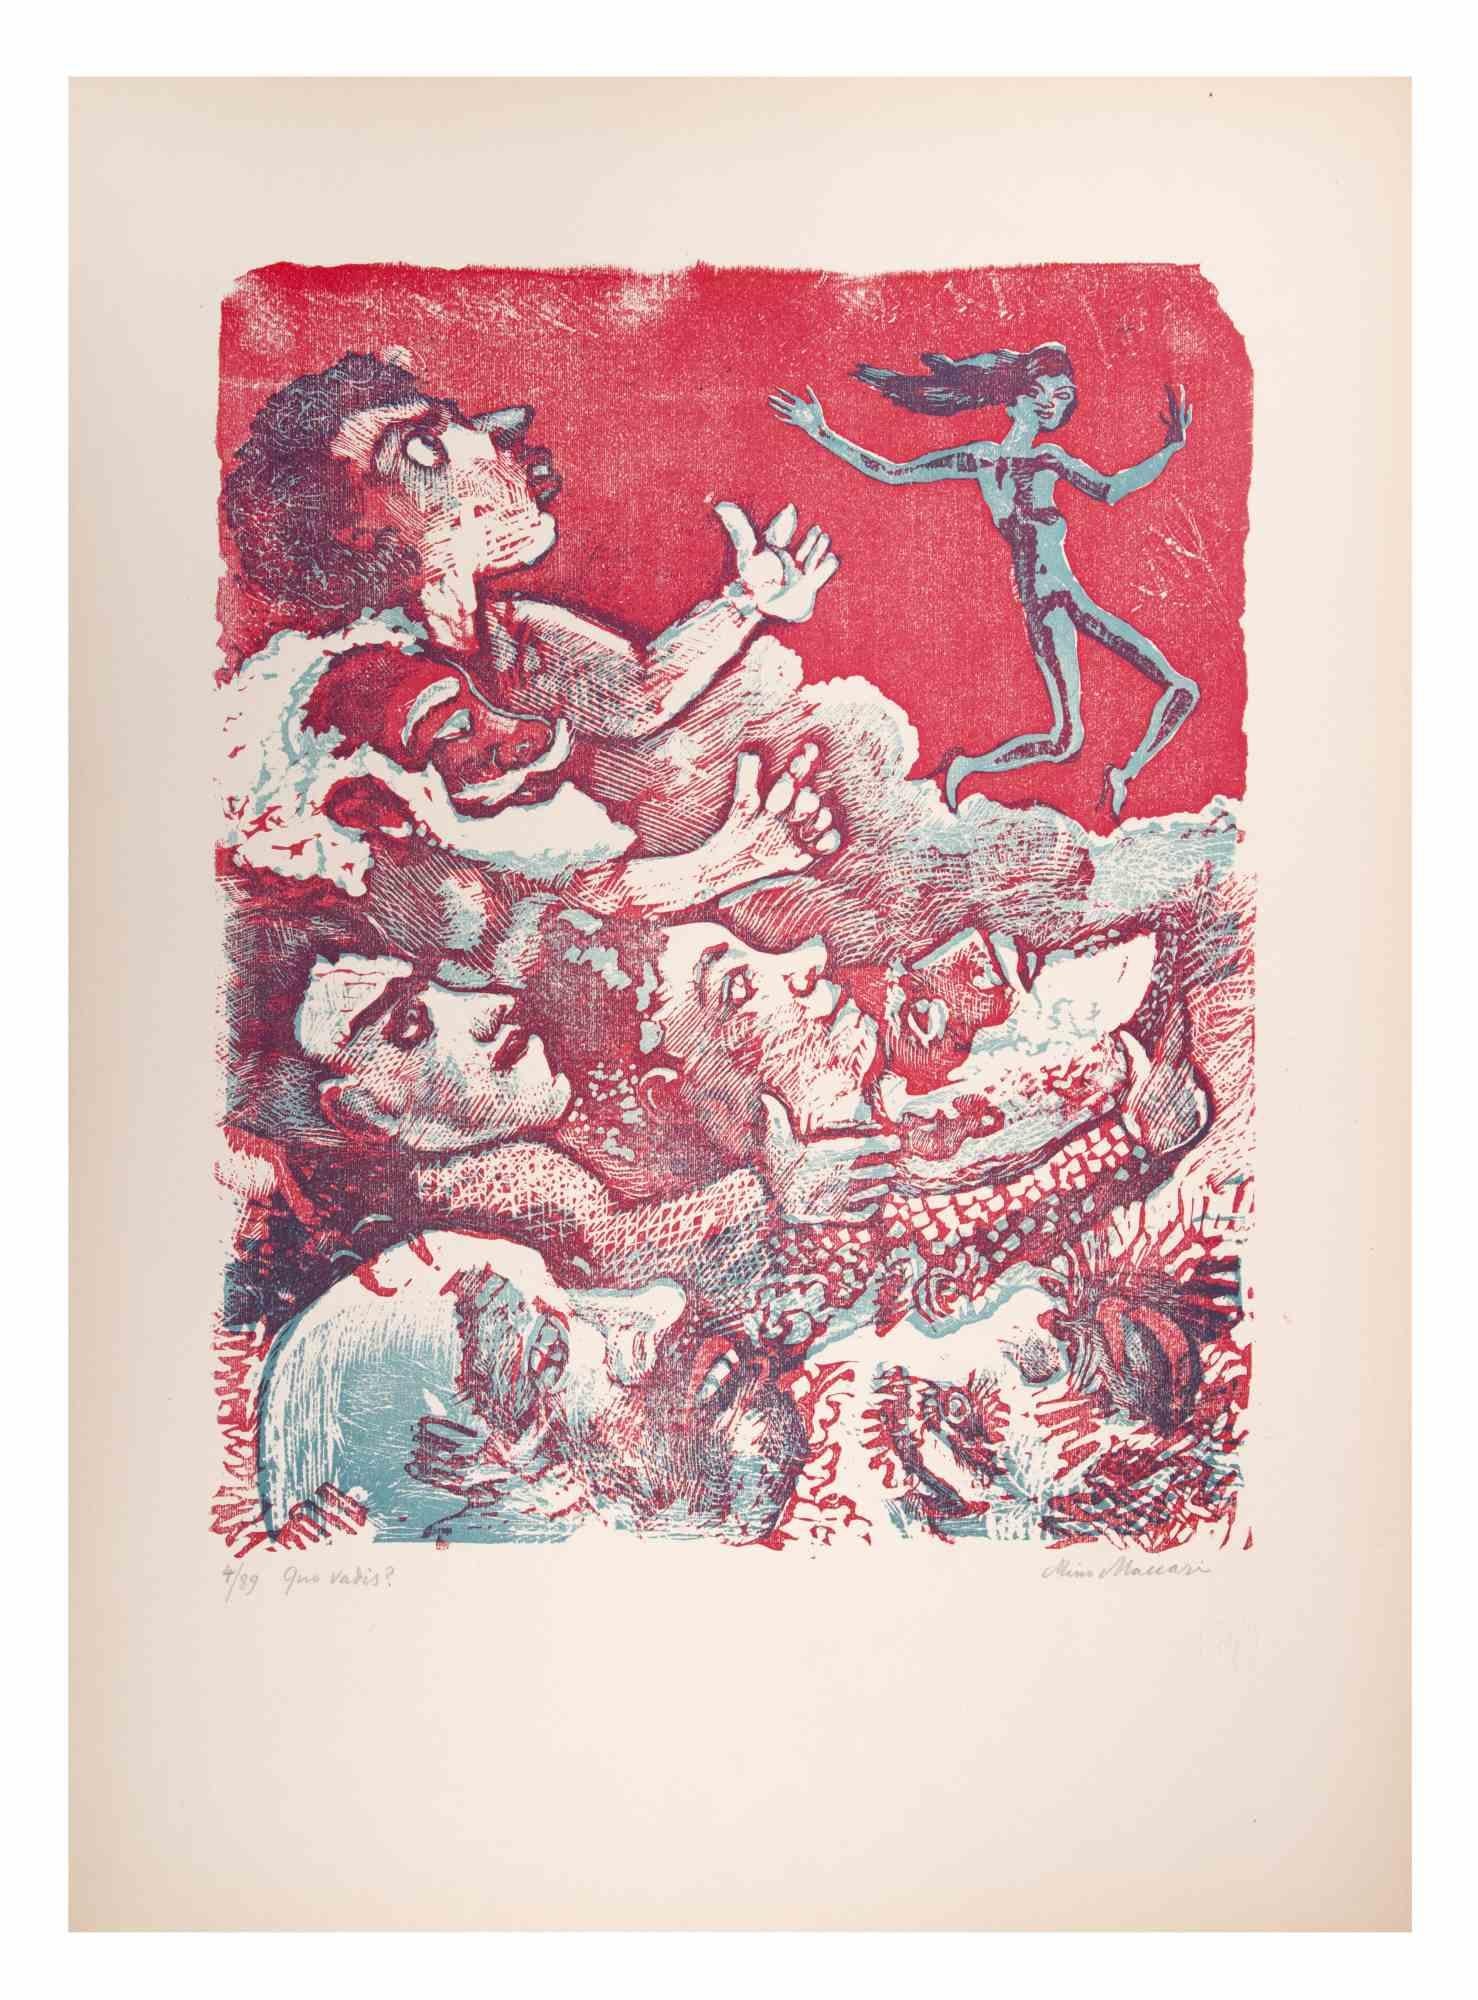 Quo Vadis? is an Artwork realized by Mino Maccari  (1924-1989) in the Mid-20th Century.

Colored woodcut on paper. Hand-signed on the lower, numbered 4/89 specimens and titled on the left margin.

Good conditions.

Mino Maccari (Siena, 1924-Rome,